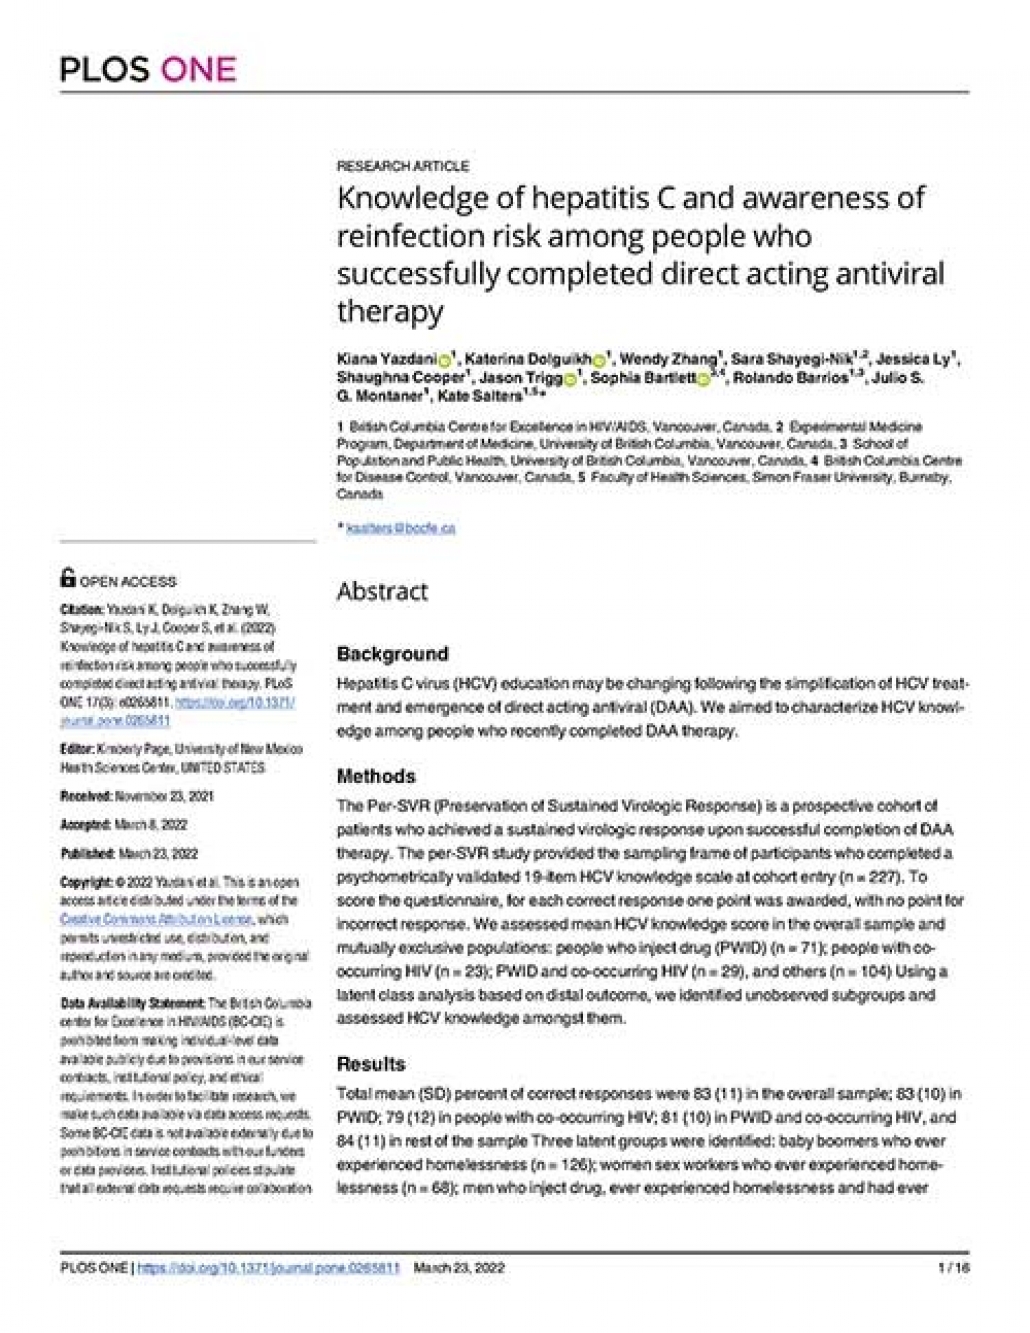 BC-CfE researchers examine HCV knowledge and awareness of reinfection risk among people successfully treated with direct acting antiviral therapy